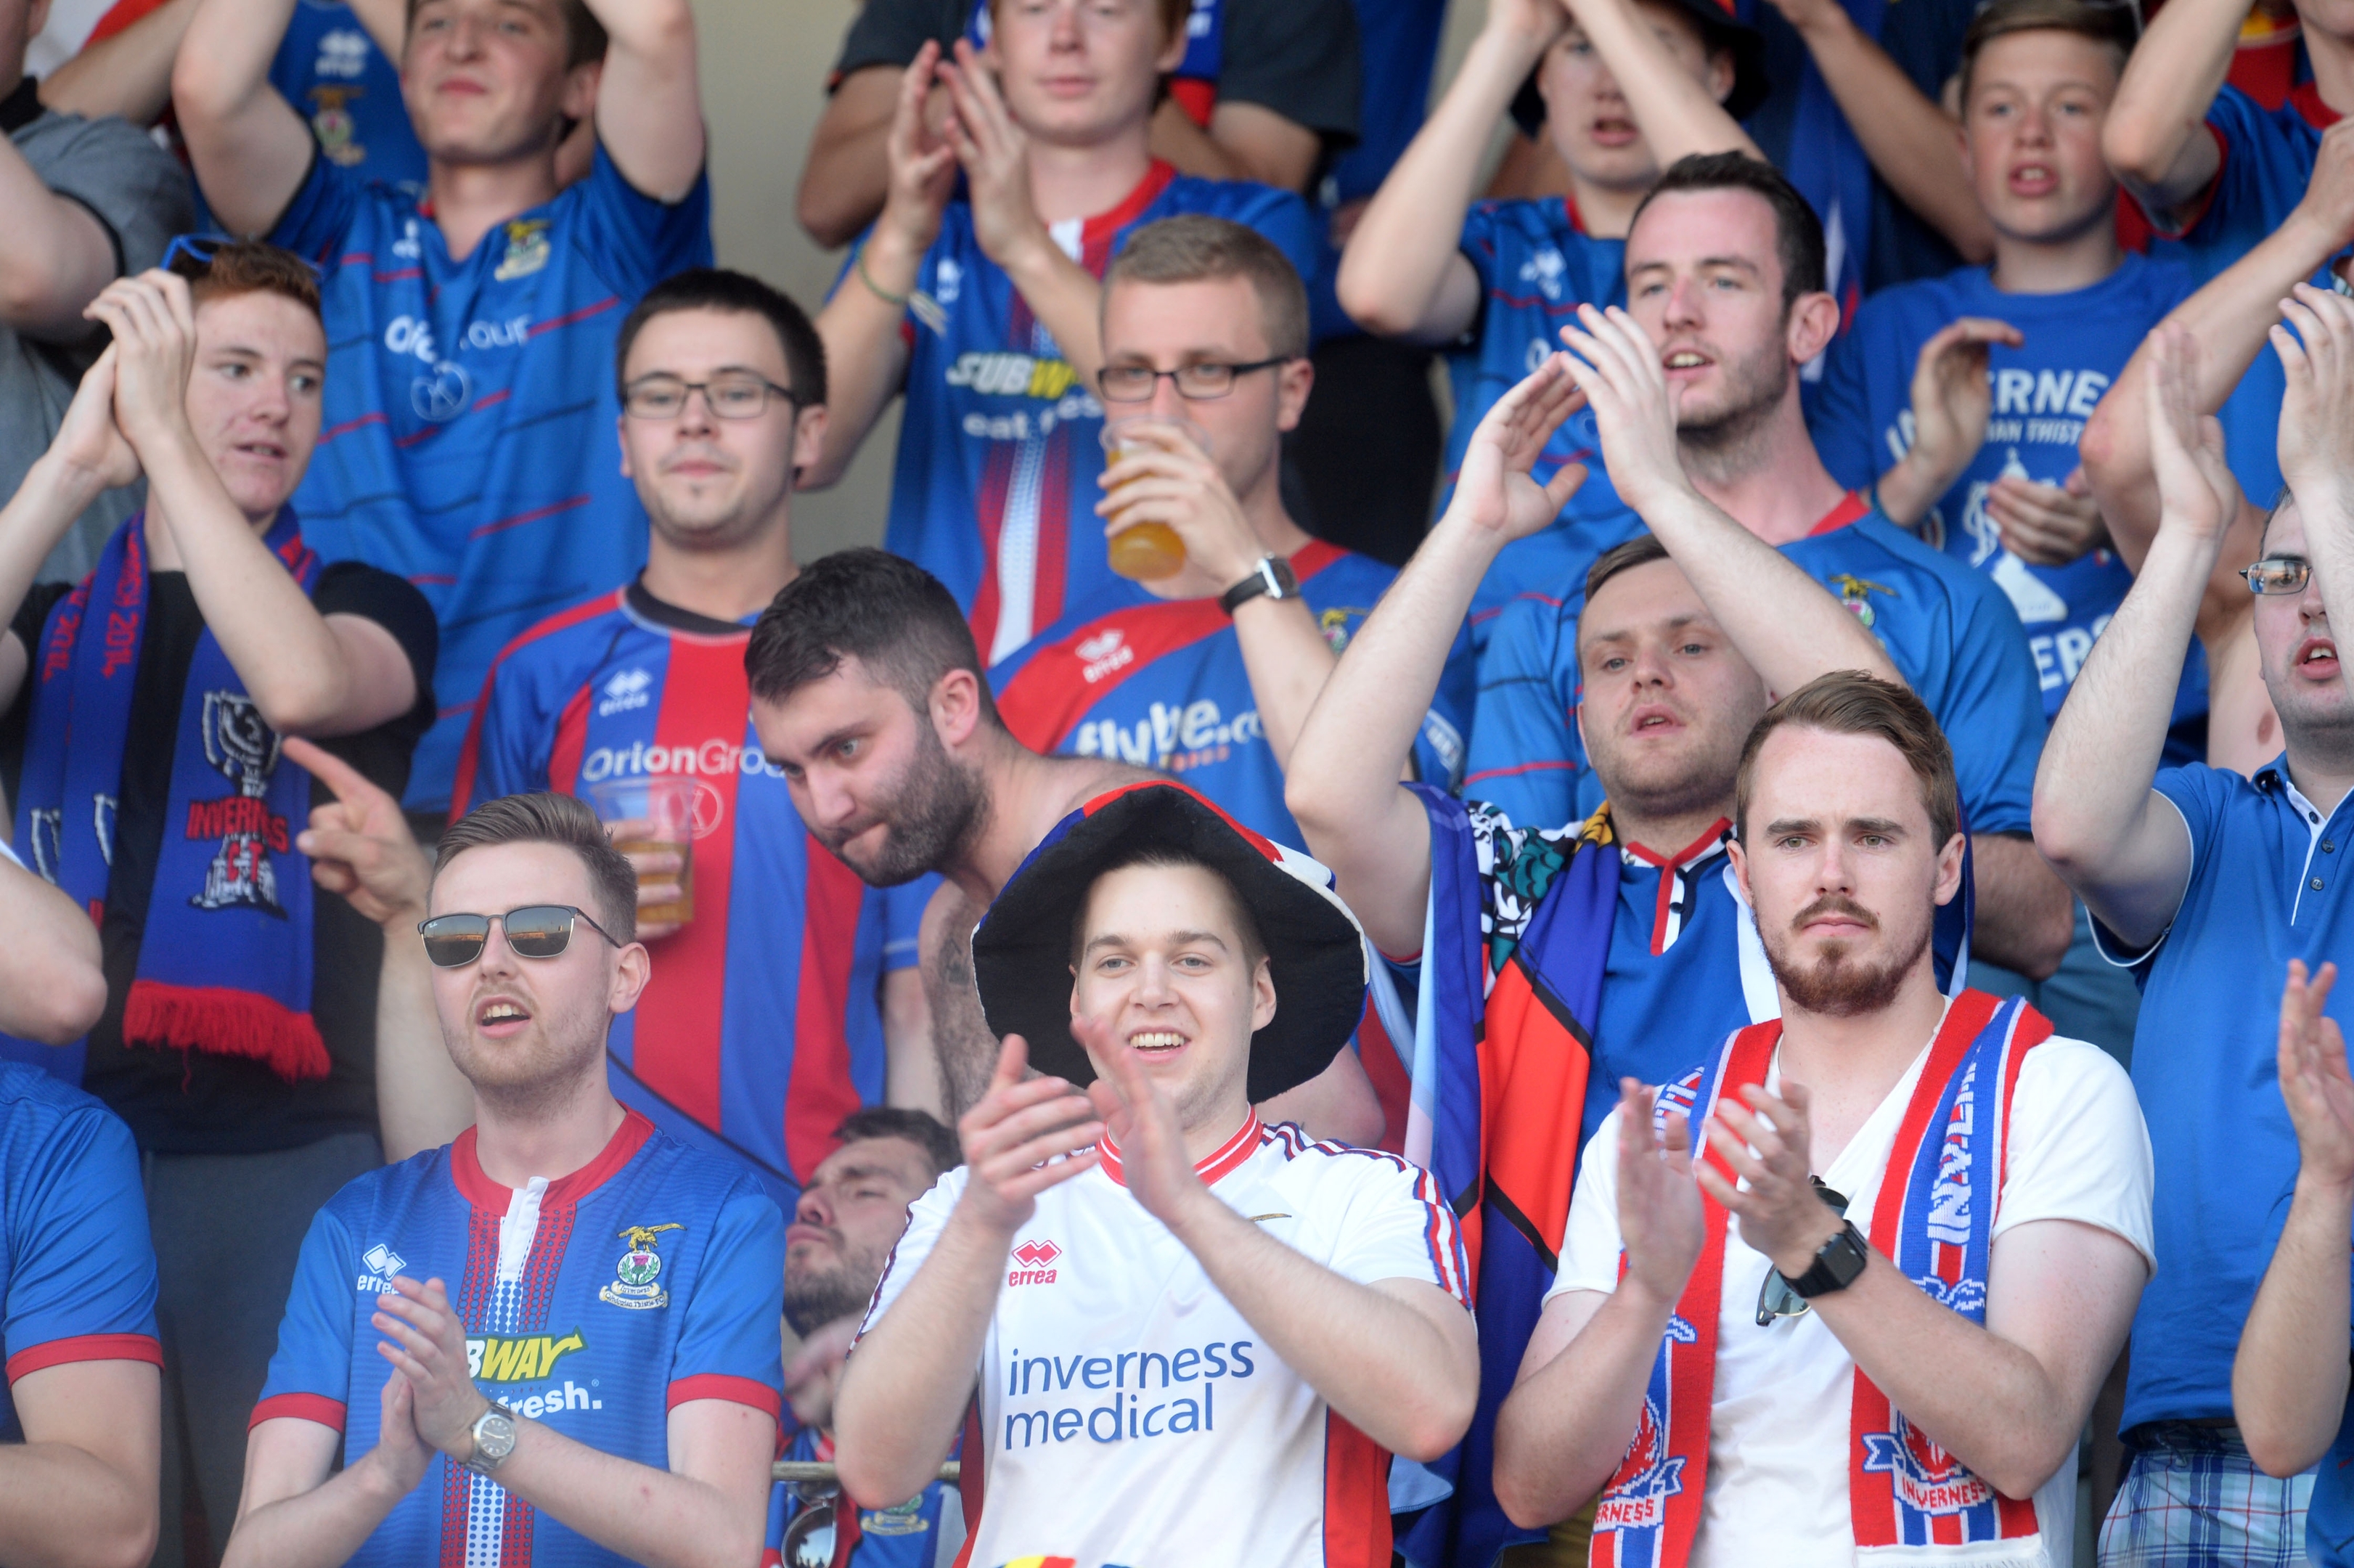 The Caley Thistle fans travelled in good numbers, with around 500 in the stadium 